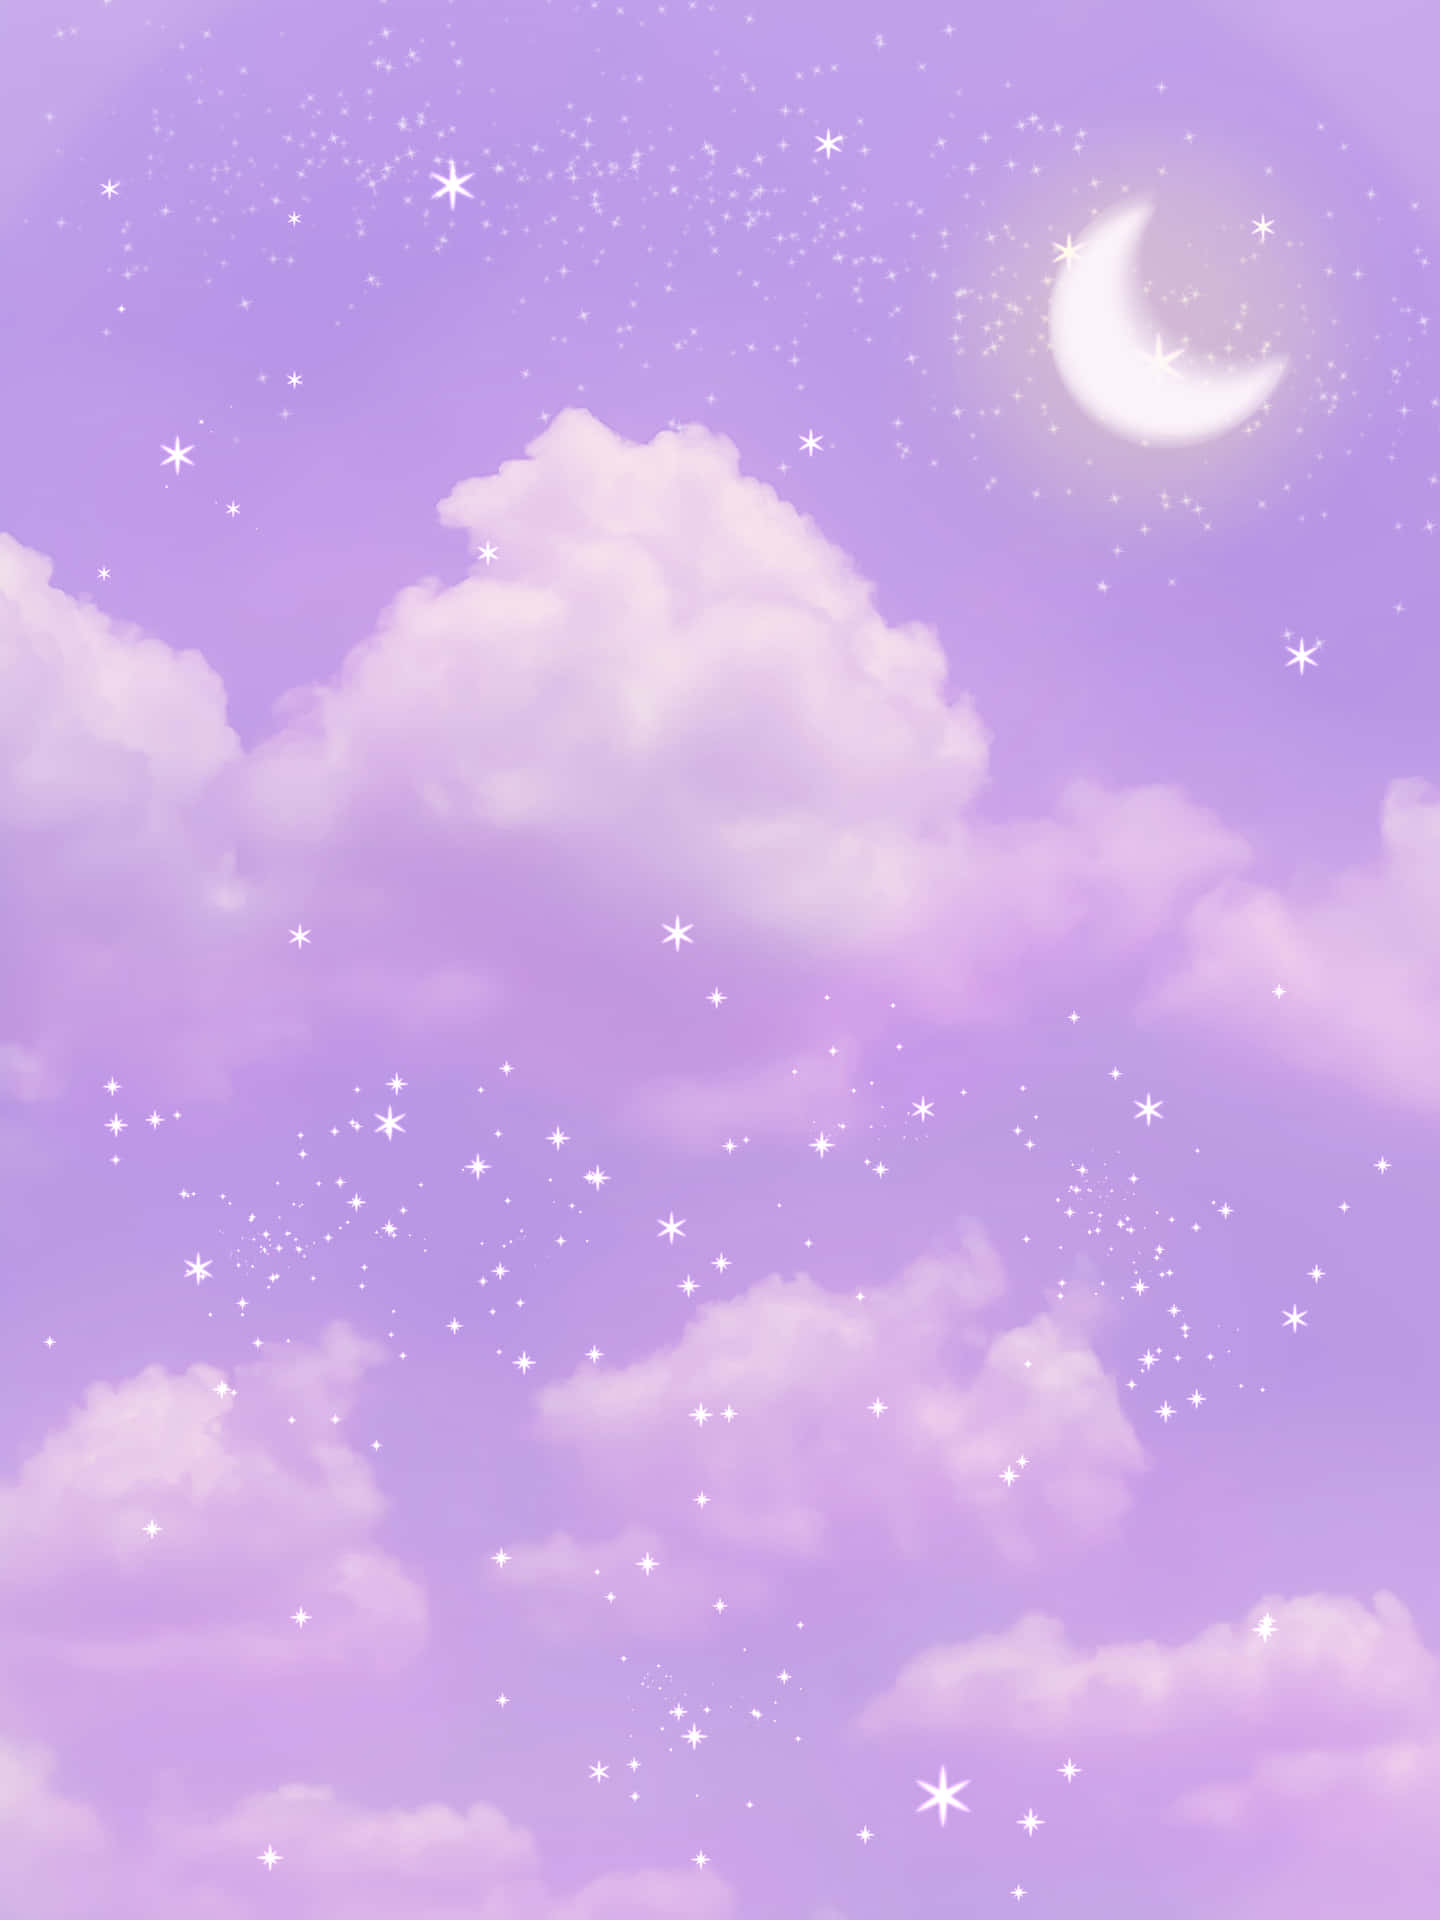 Sparkly Purple Aesthetic Background With Crescent Moon